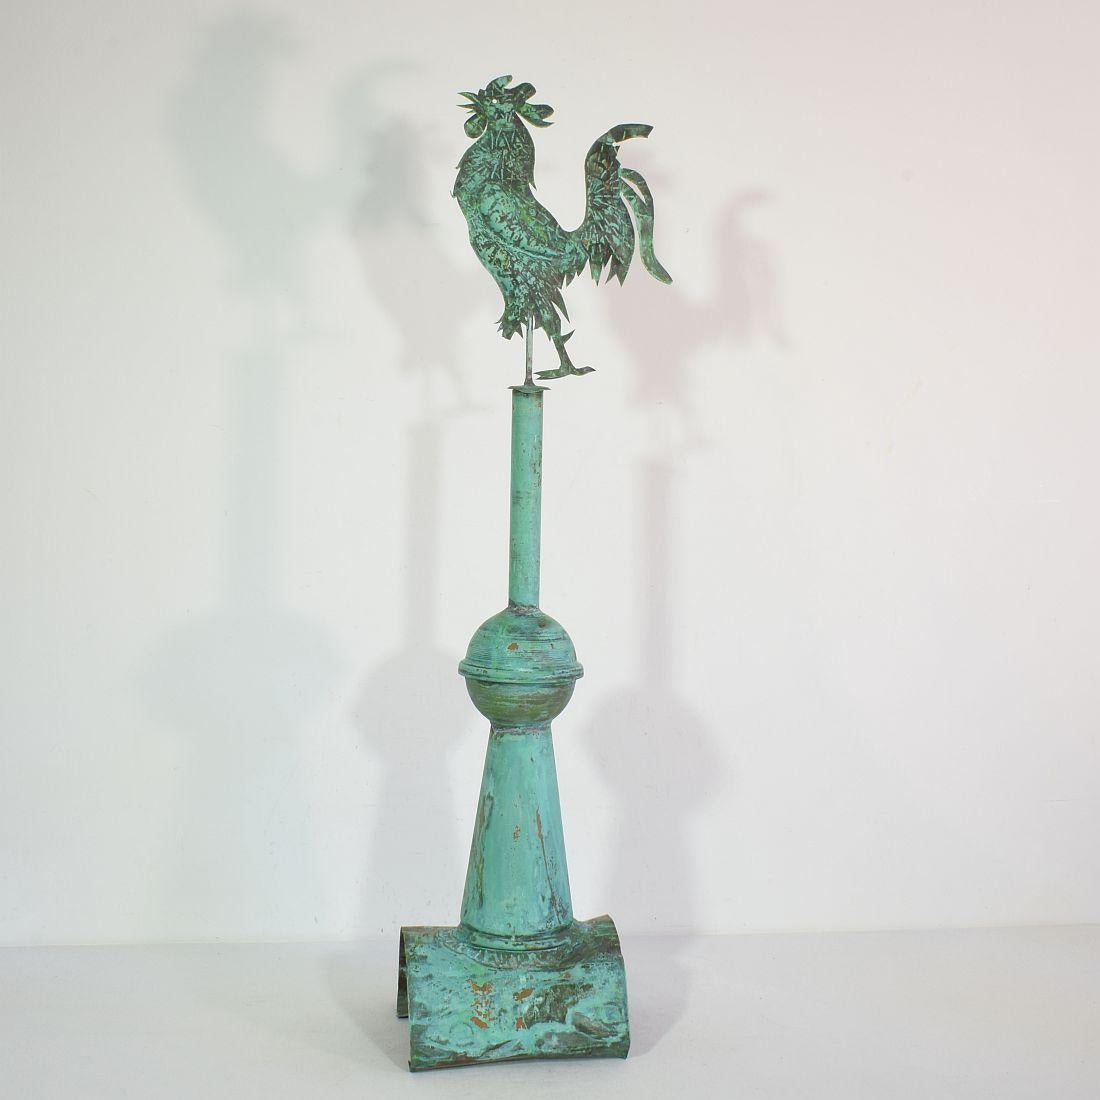 Wonderful folk art copper weather-vane with rooster. A real unique find with gorgeous vert de gris patine.
France, circa 1900-19200. 
Weathered and small losses.